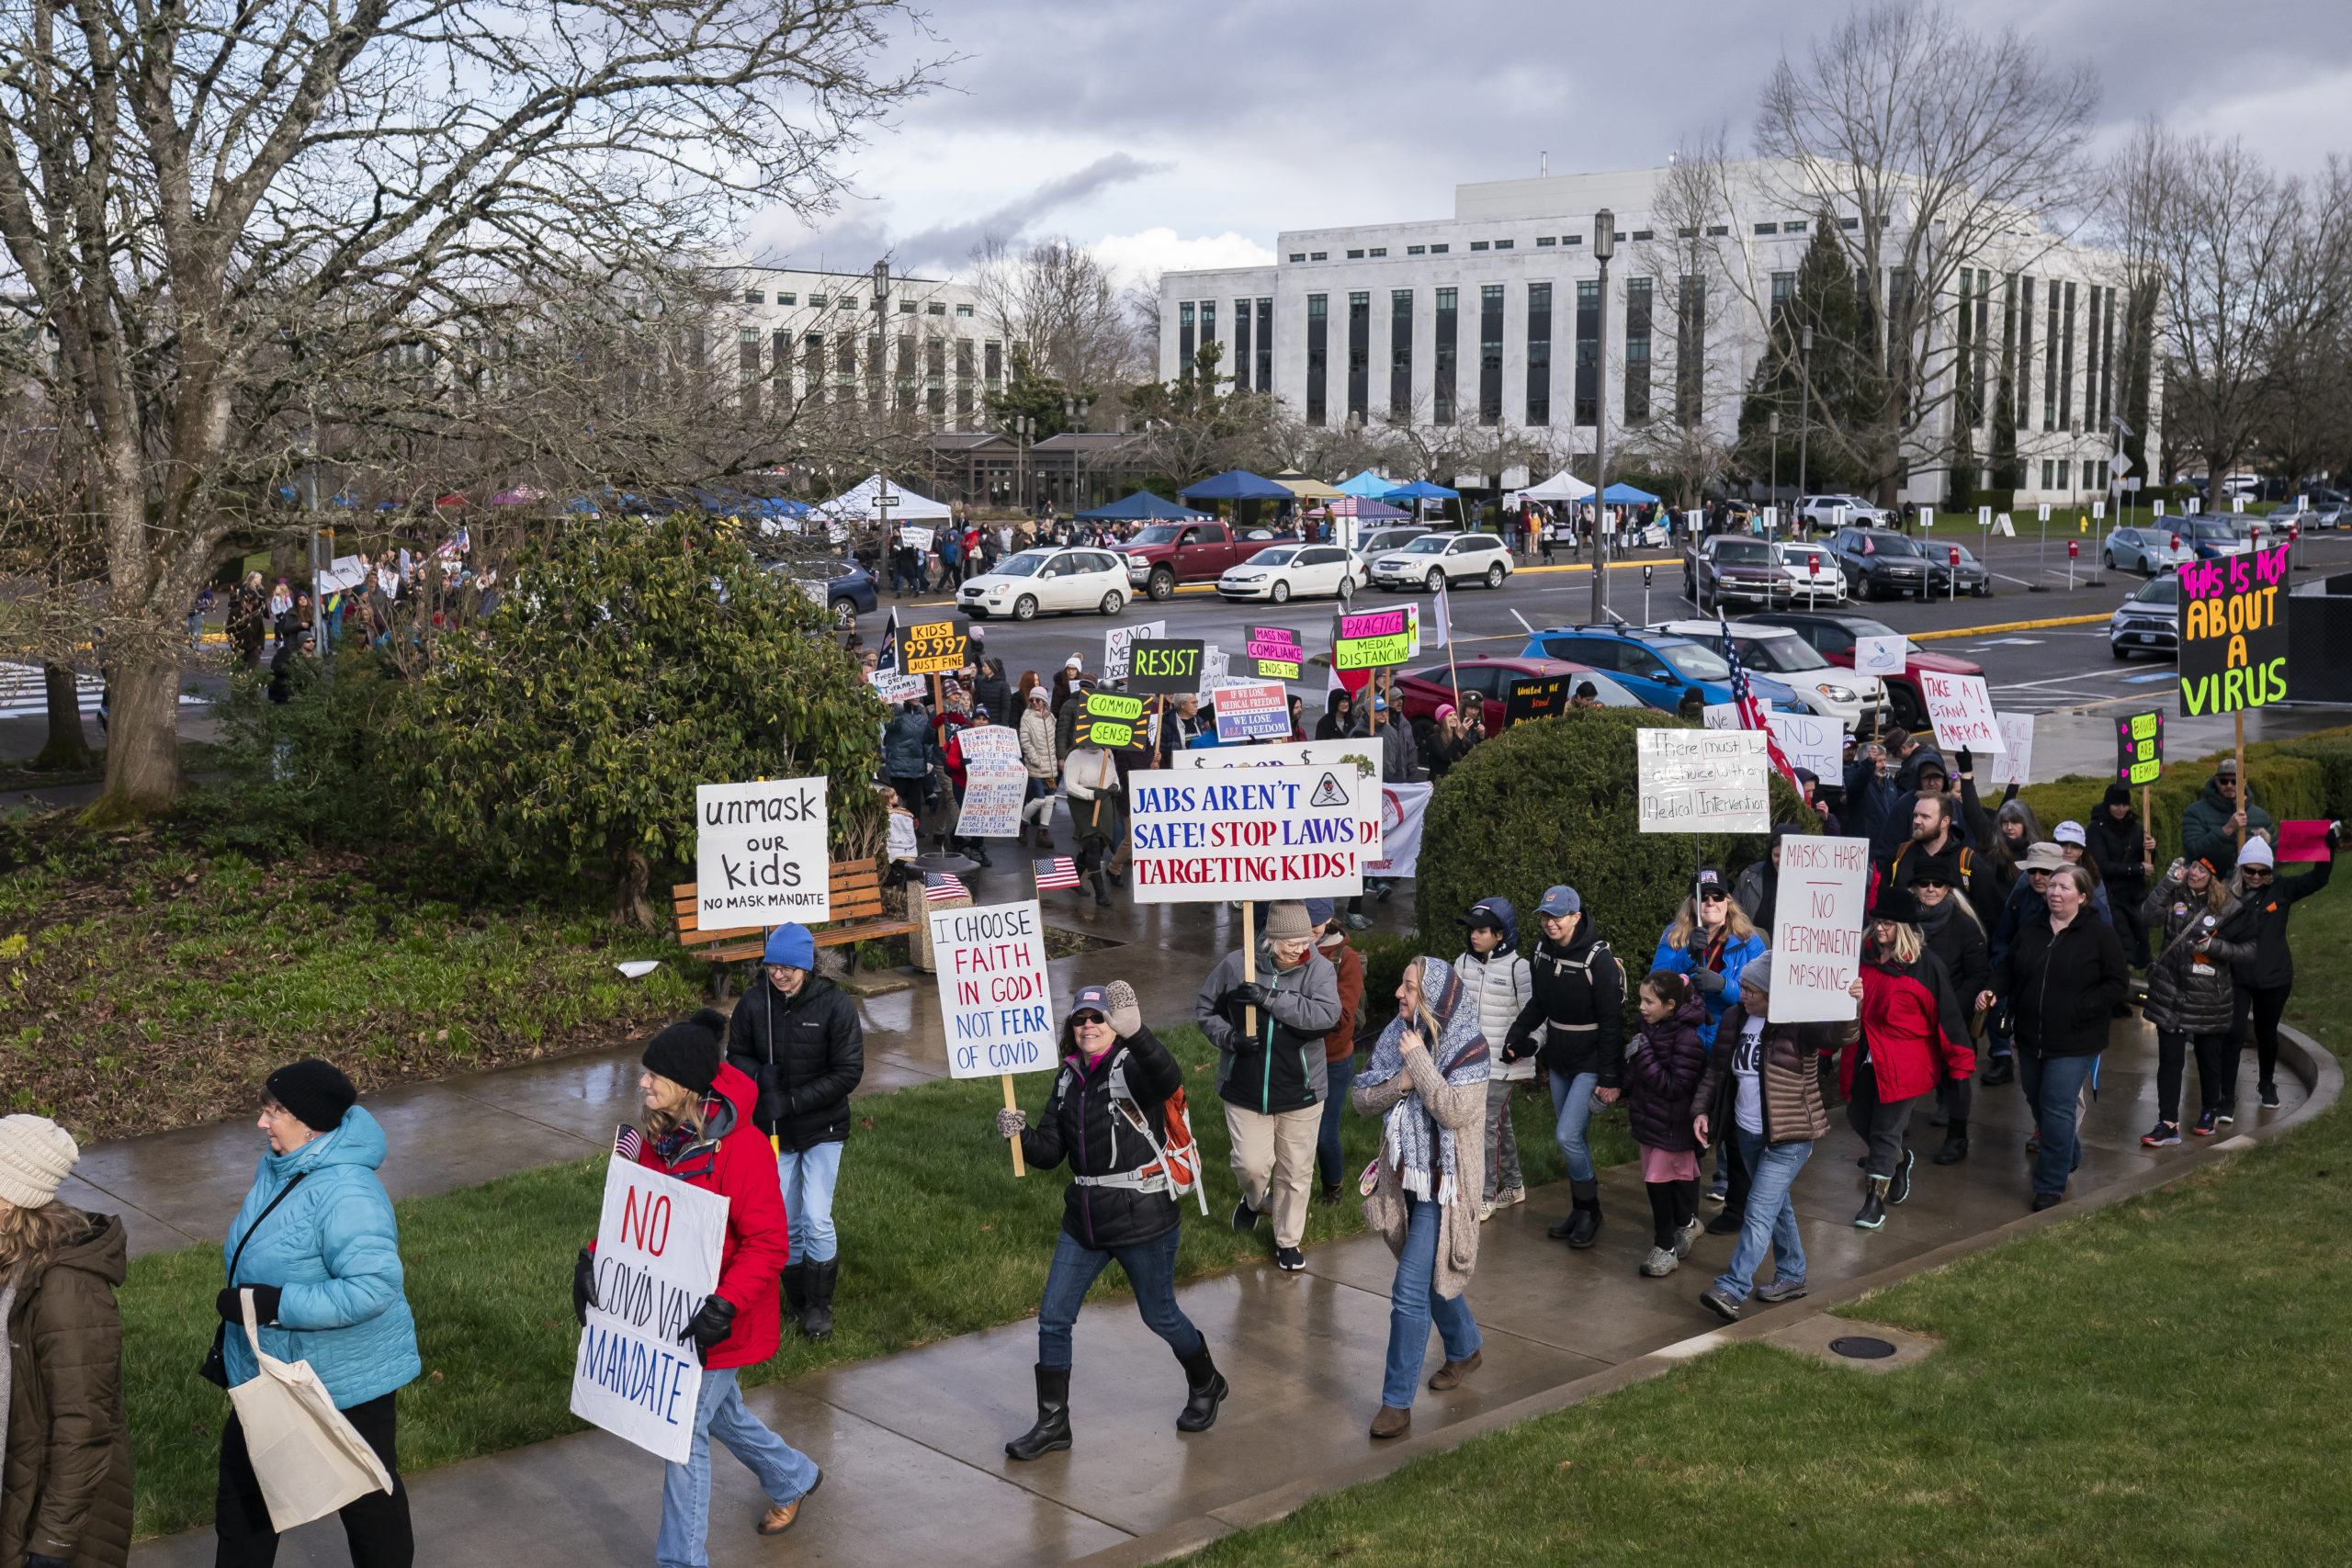 Attendees march during a rally against vaccine and mask mandates at the state capitol on February 1, 2022 in Salem, Oregon. After listening to speakers outside the building, the crowd was successful in getting state troopers to let some maskless members into the statehouse. (Photo by Nathan Howard/Getty Images)